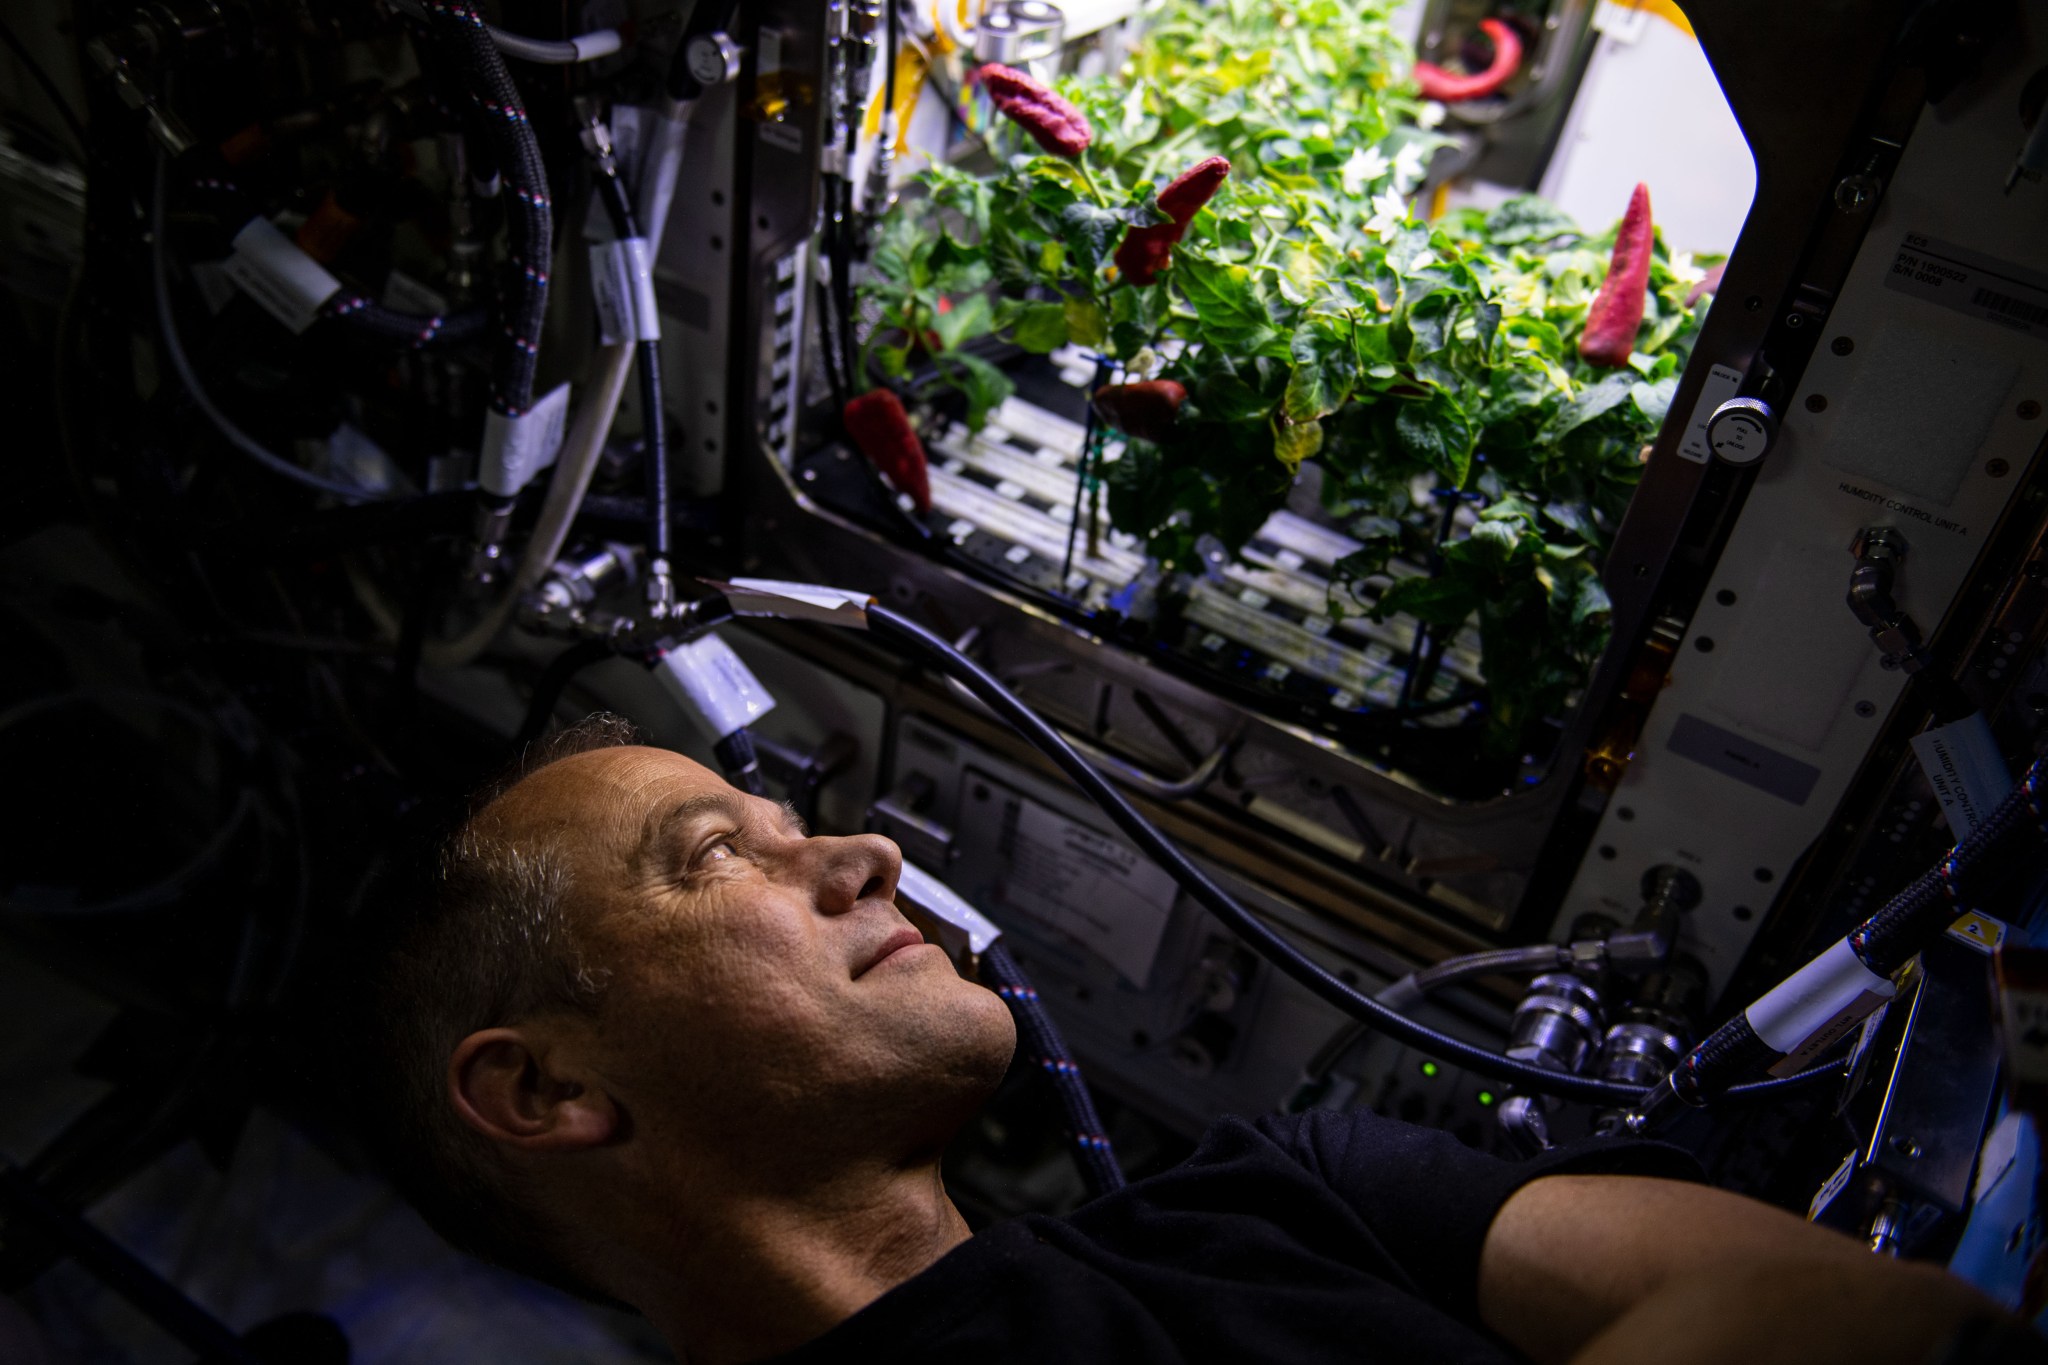 NASA astronaut and Crew-3 member Tom Marshburn looks at chiles growing inside of the Advanced Plant Habitat. Crew-3 performed the second harvest of chiles aboard the International Space Station for the Plant Habitat-04 experiment. This plant experiment, one of the station’s most complex to date because of the long germination and growing times, will add to NASA’s knowledge of growing food crops for long-duration space missions.